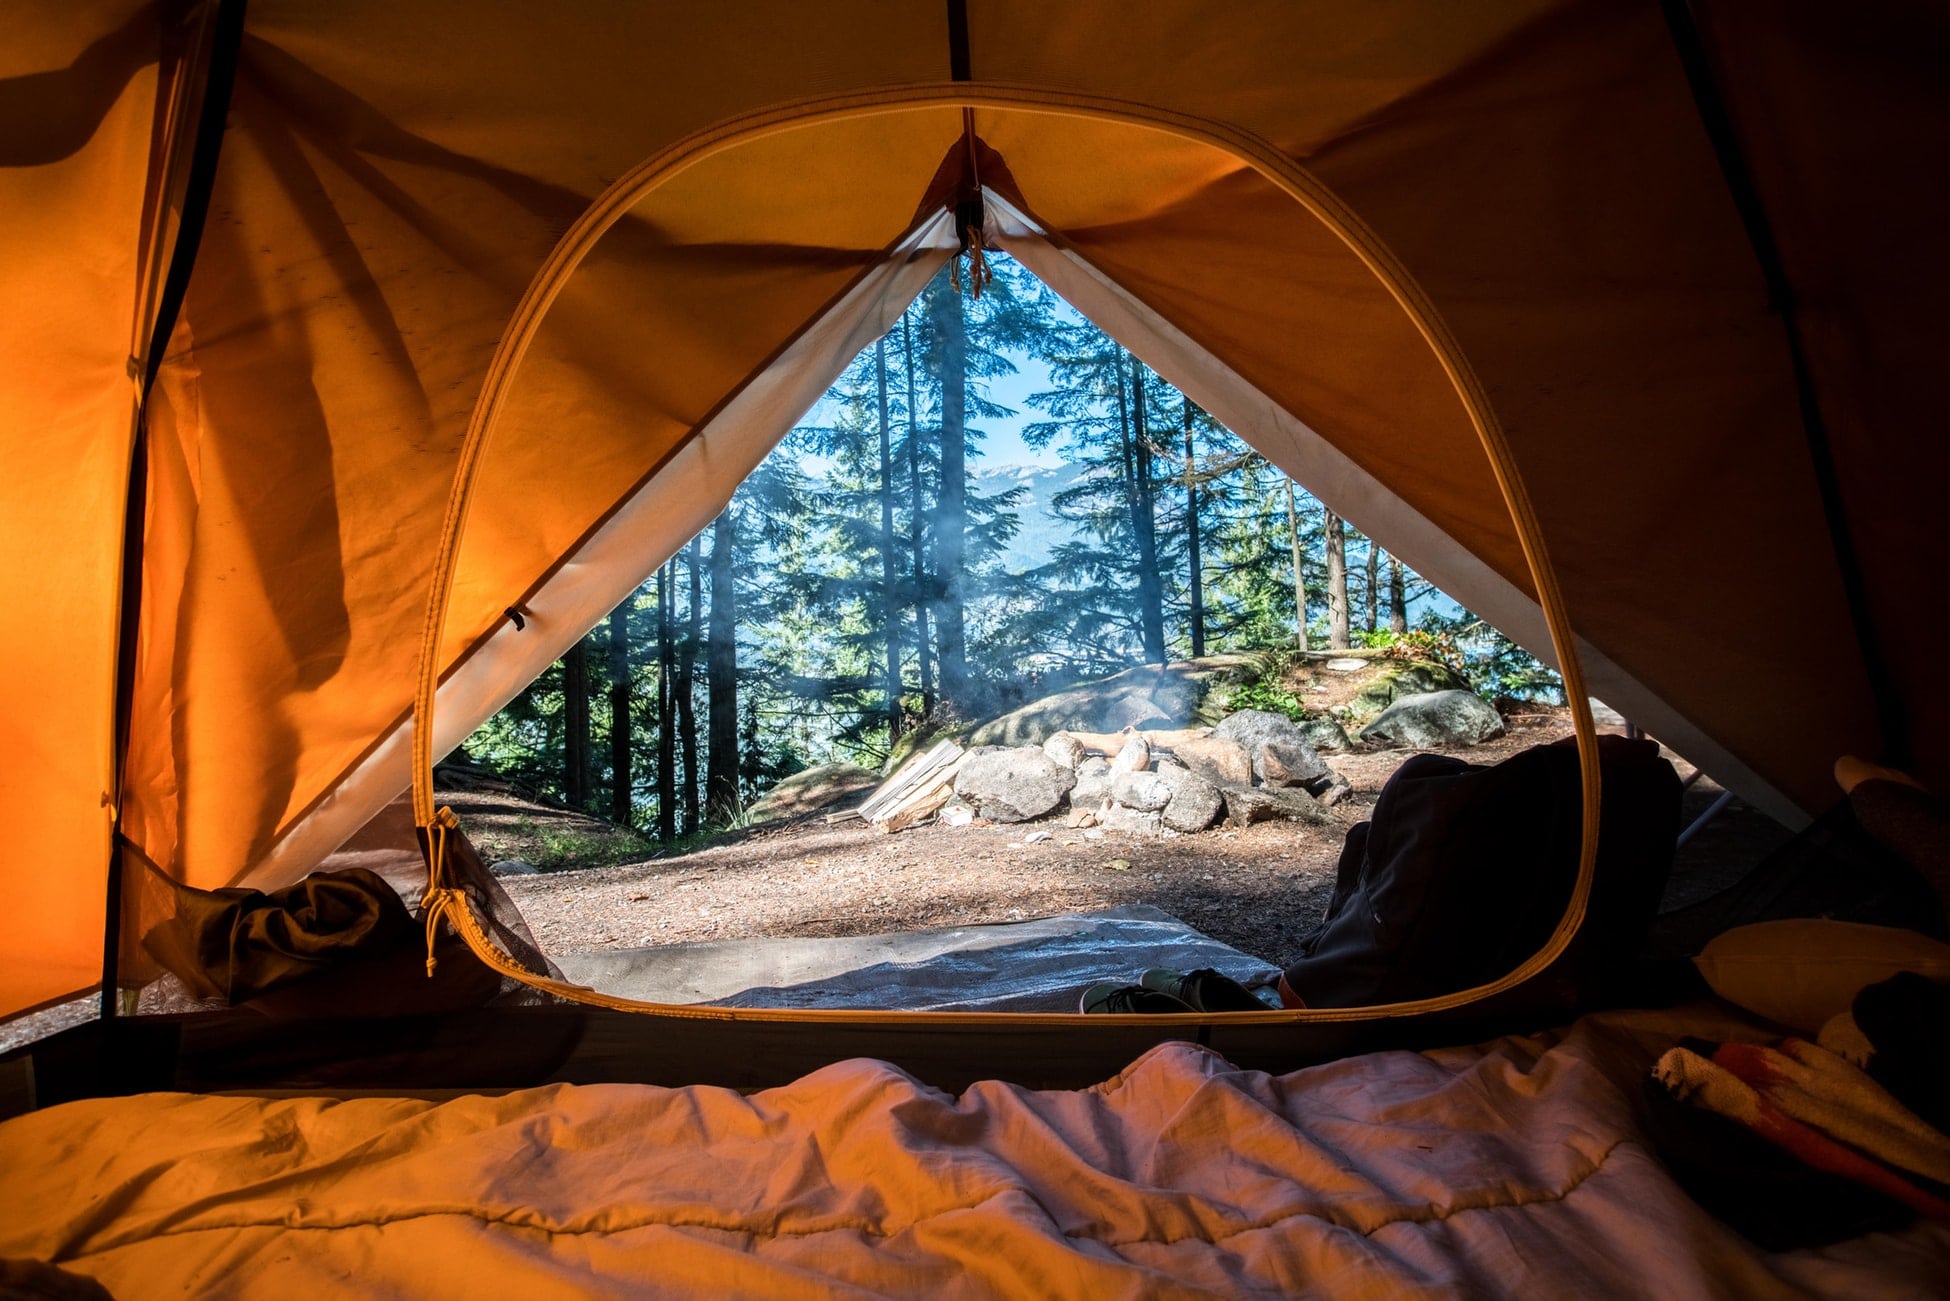 35 Camping Road Trip Essentials For Your Packing List [2021]